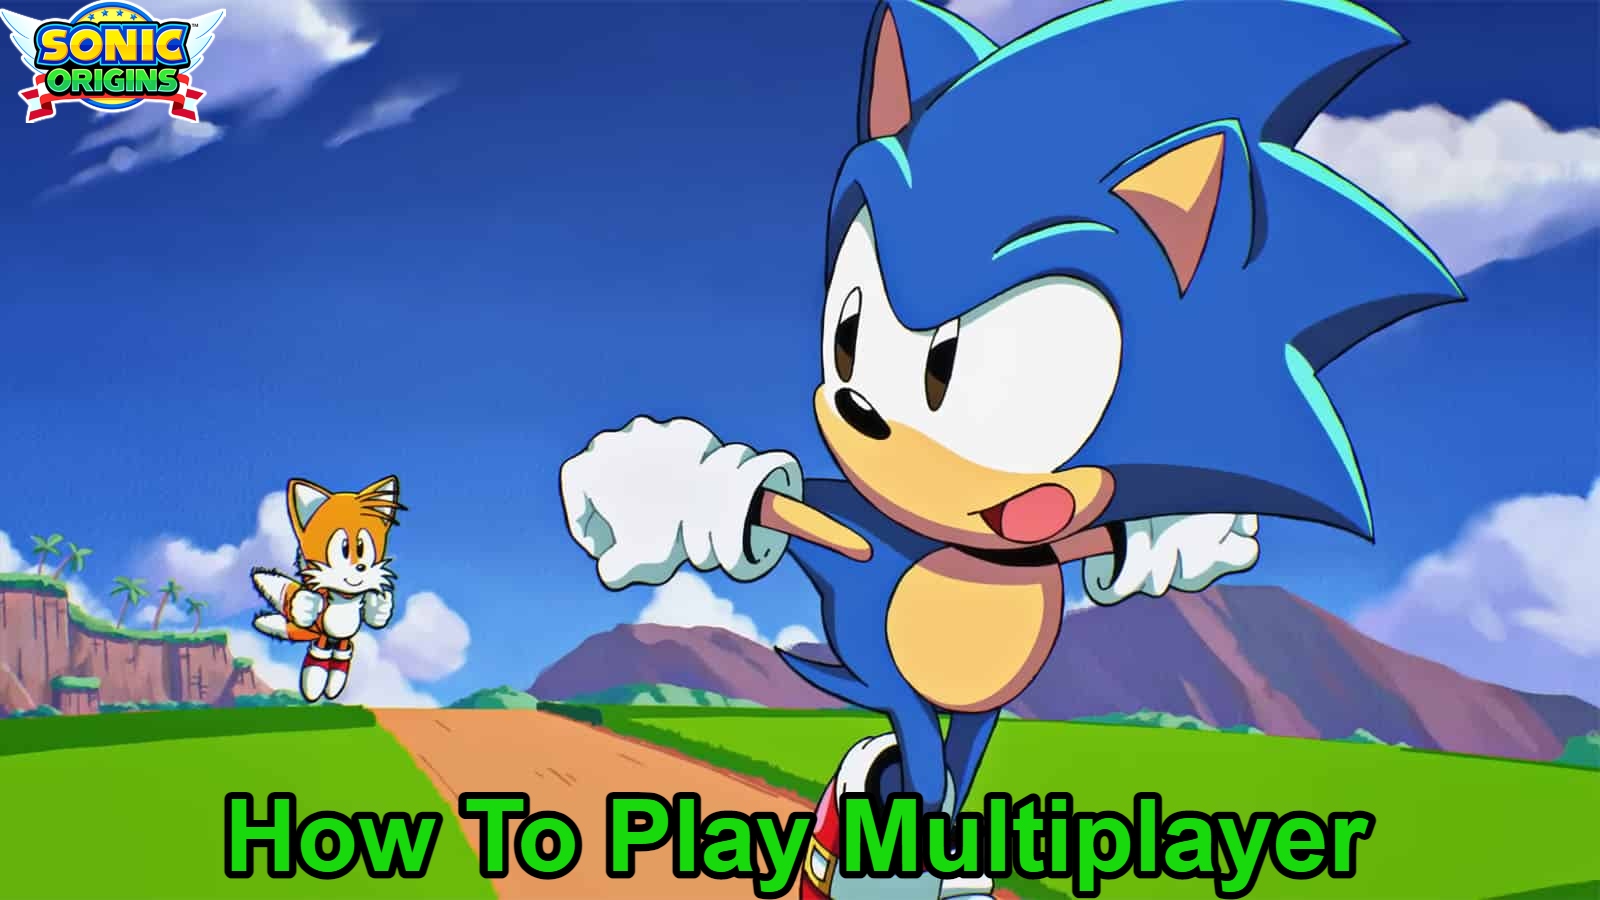 Sonic Origins: How To Play With Friends (Multiplayer Guide)